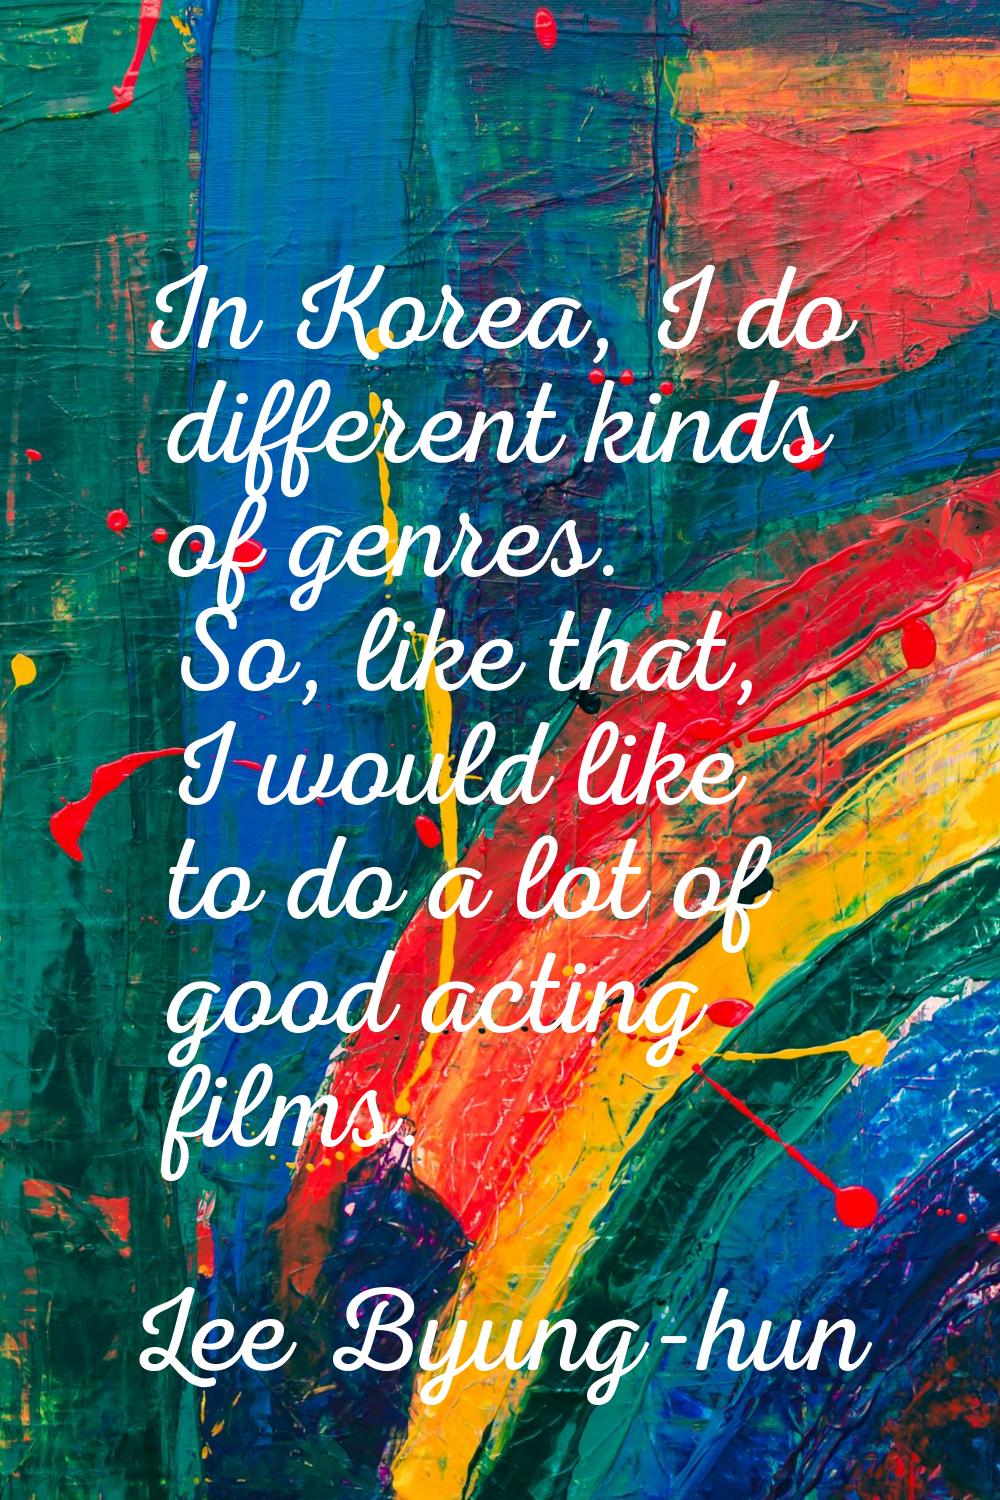 In Korea, I do different kinds of genres. So, like that, I would like to do a lot of good acting fi